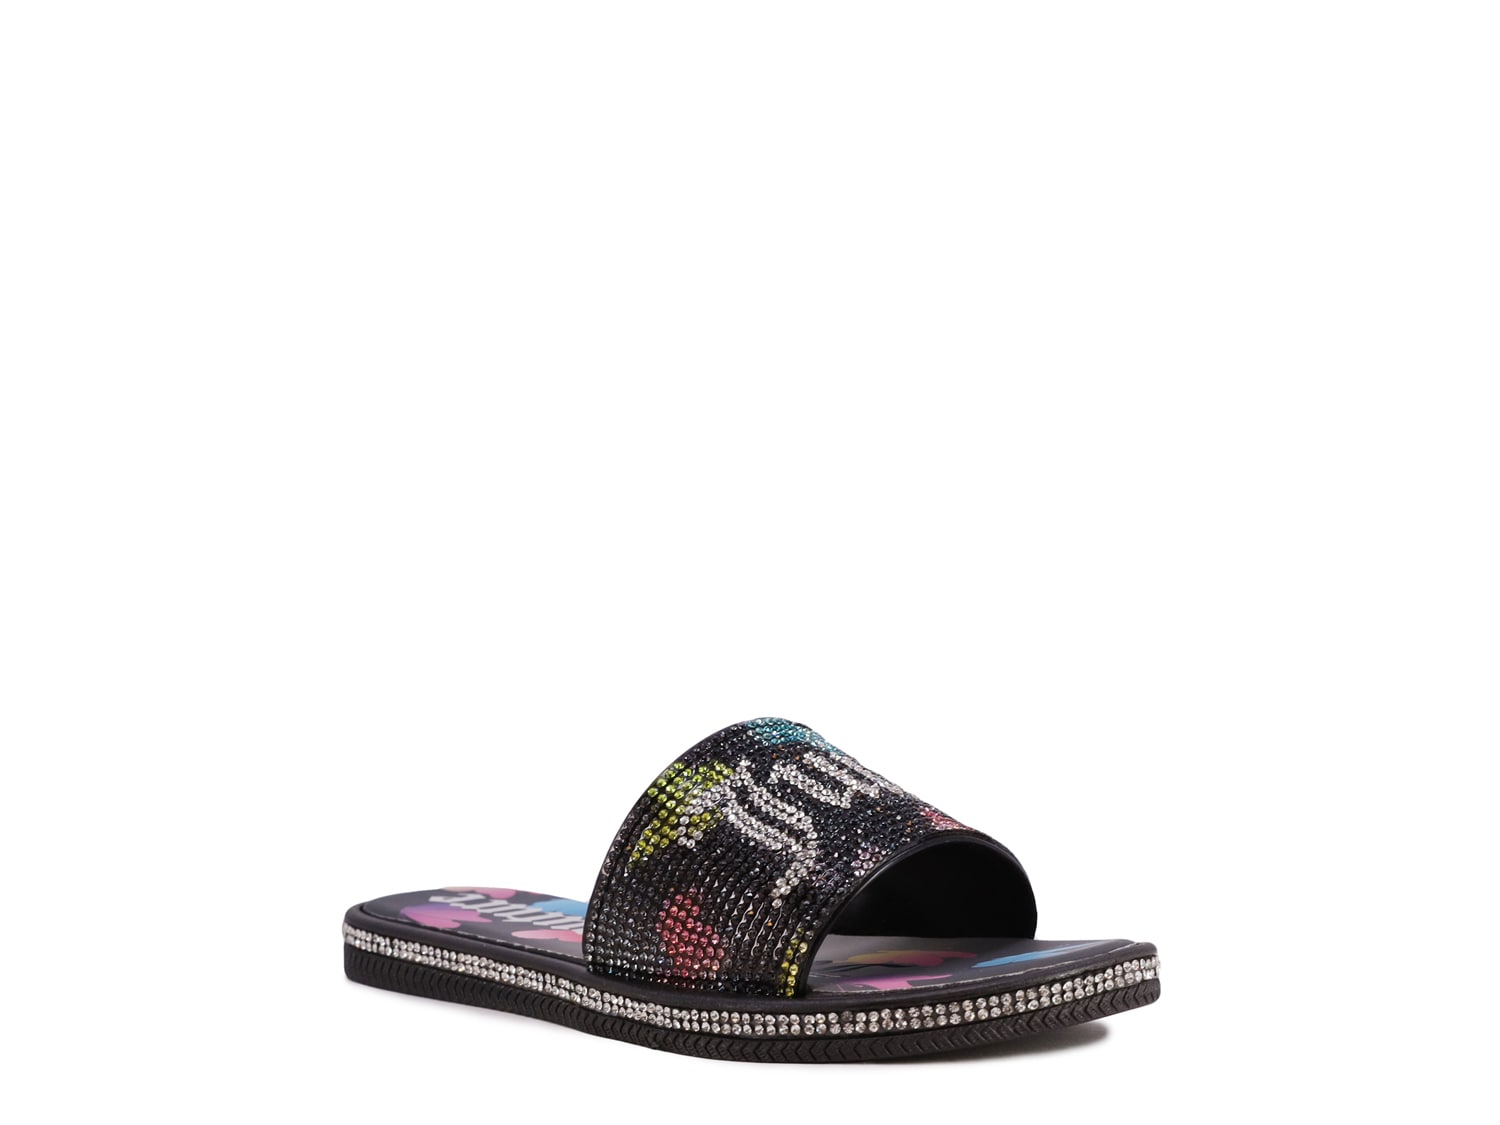 Juicy Couture Squaw Valley Sandal - Kids' - Free Shipping | DSW